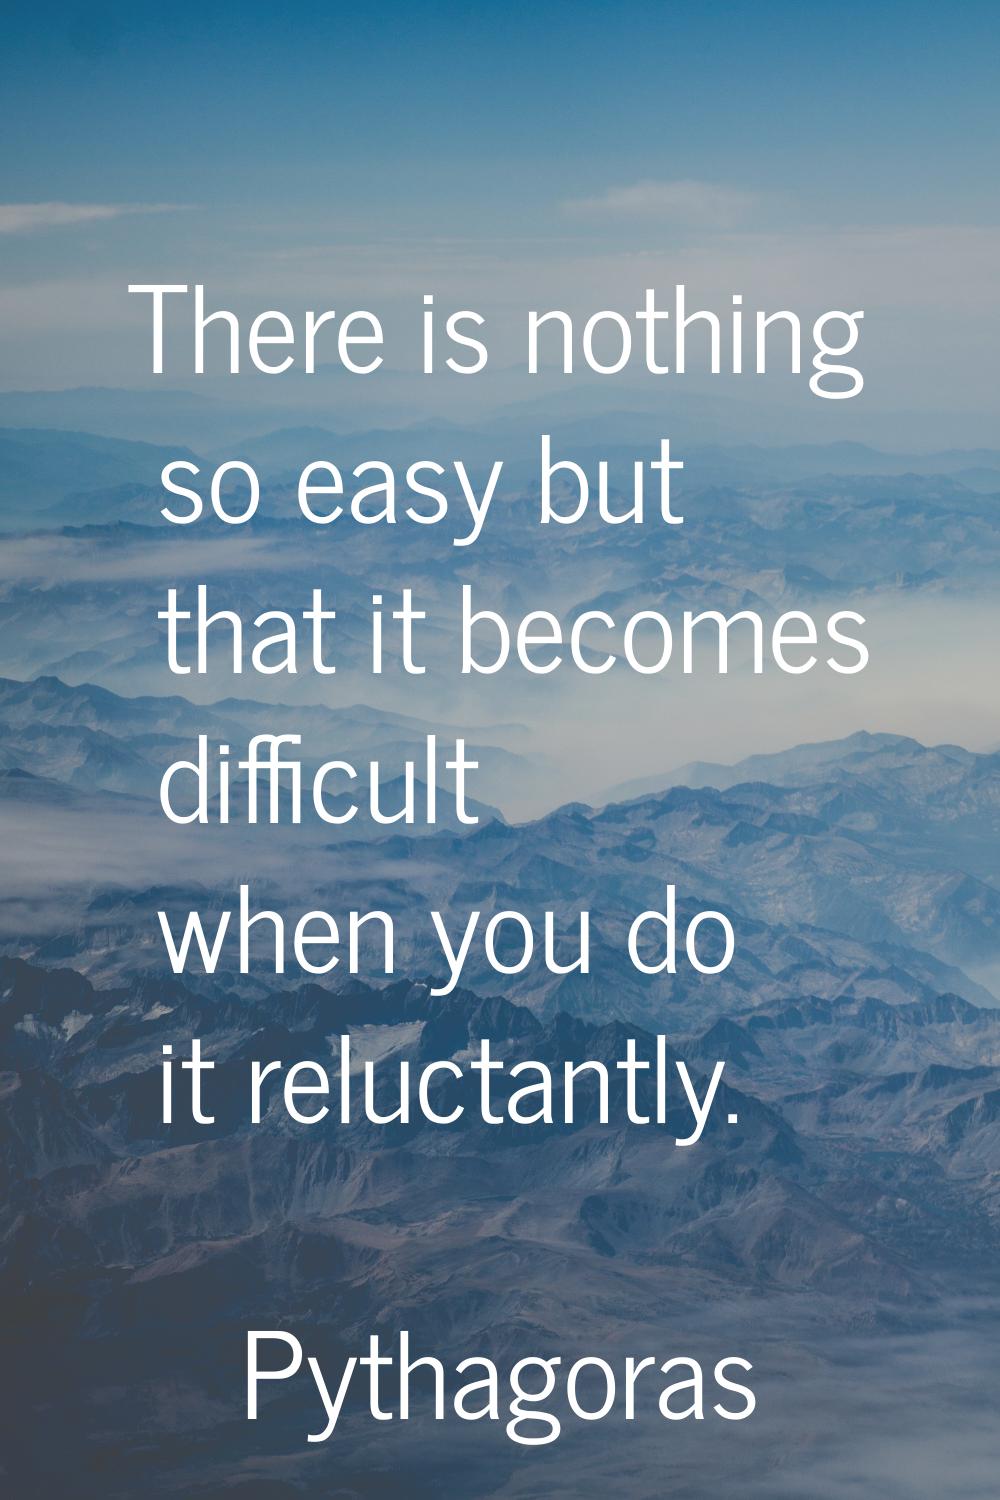 There is nothing so easy but that it becomes difficult when you do it reluctantly.